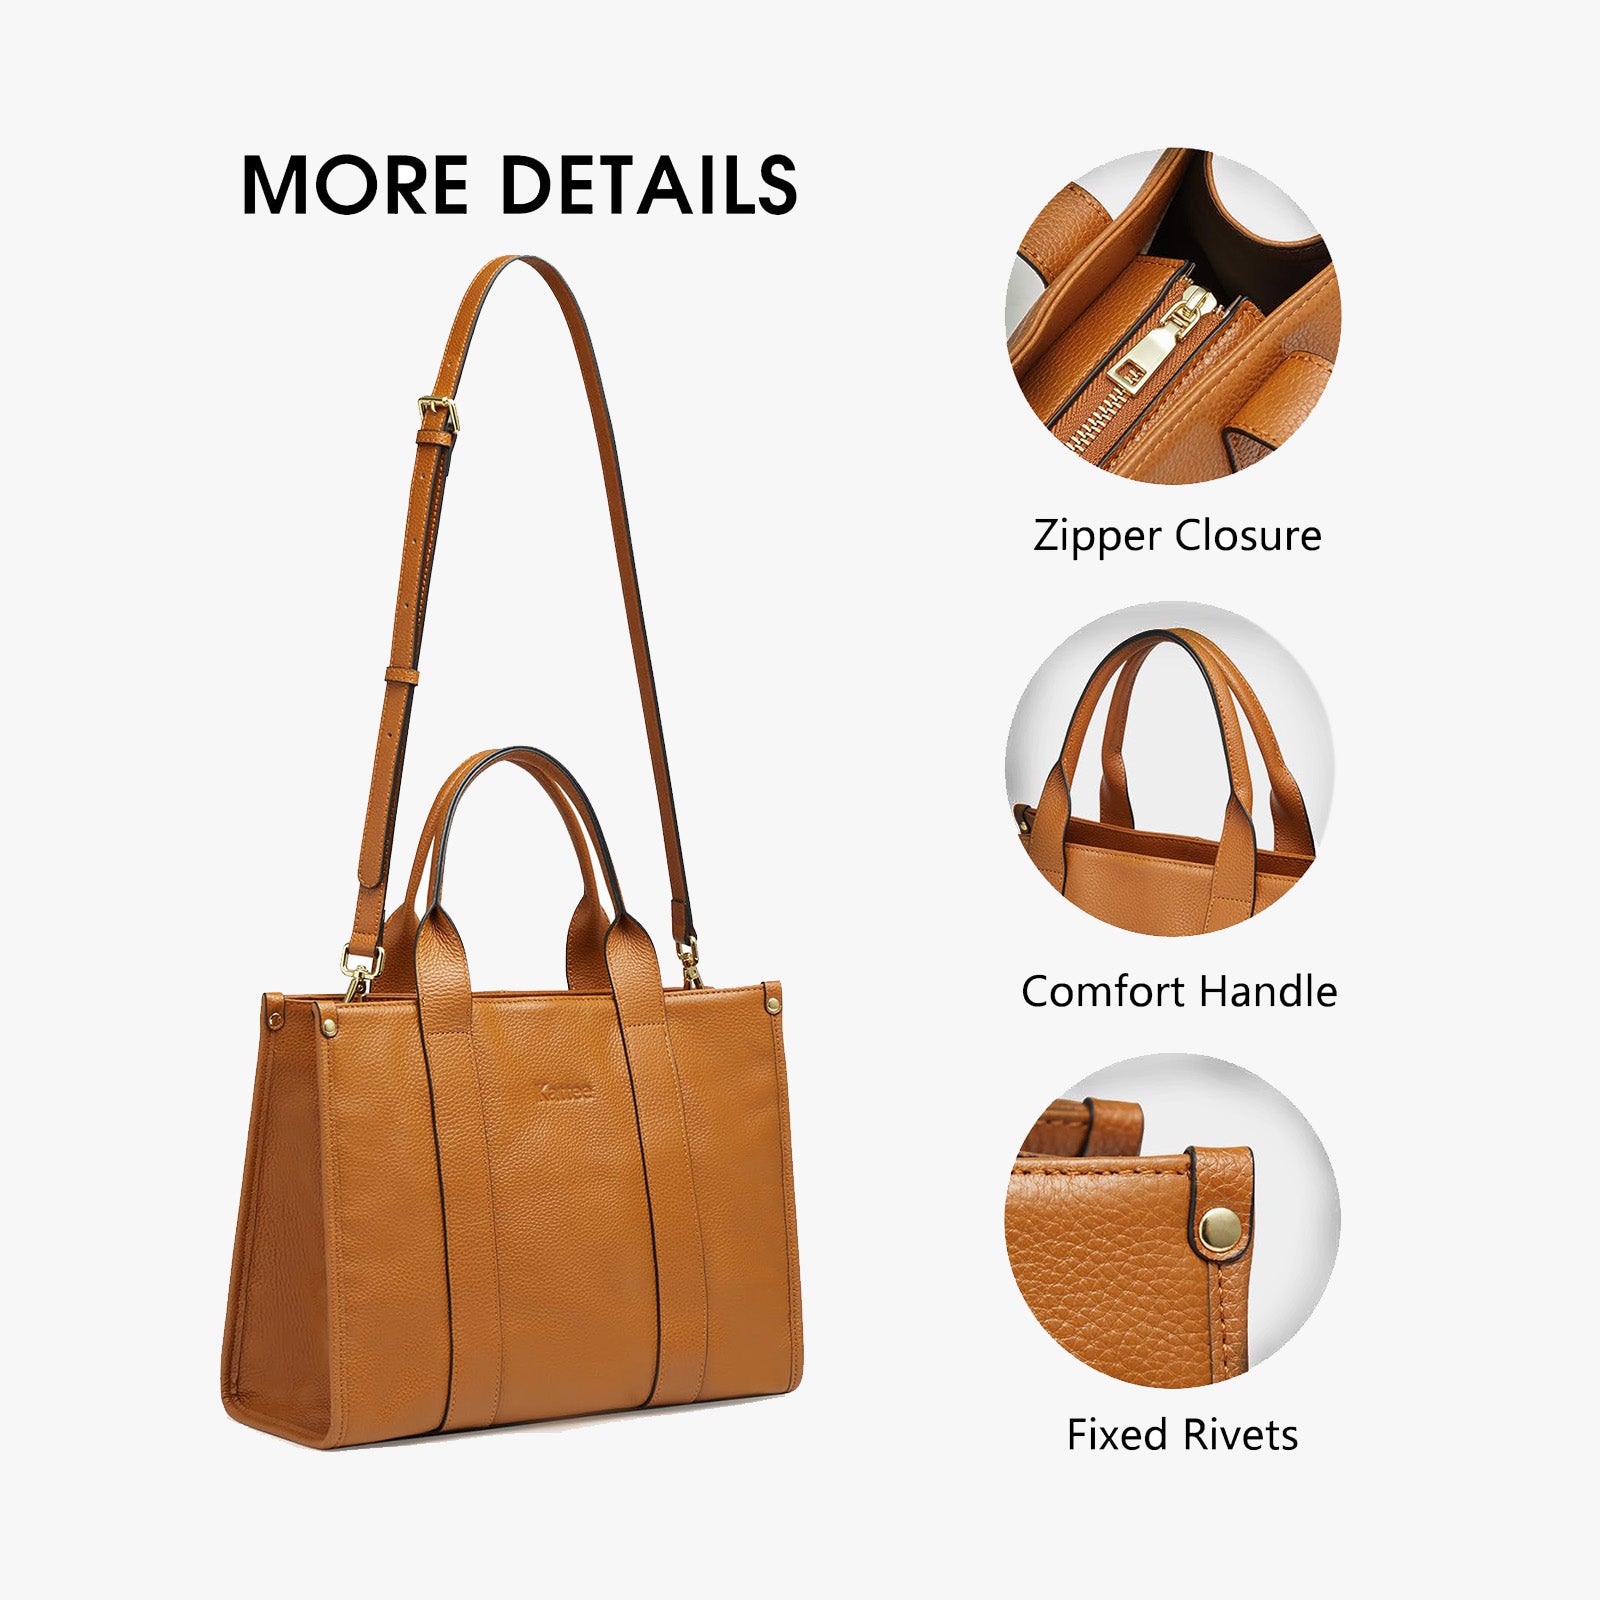 Women’s Purses and Handbags with Adjustable Strap